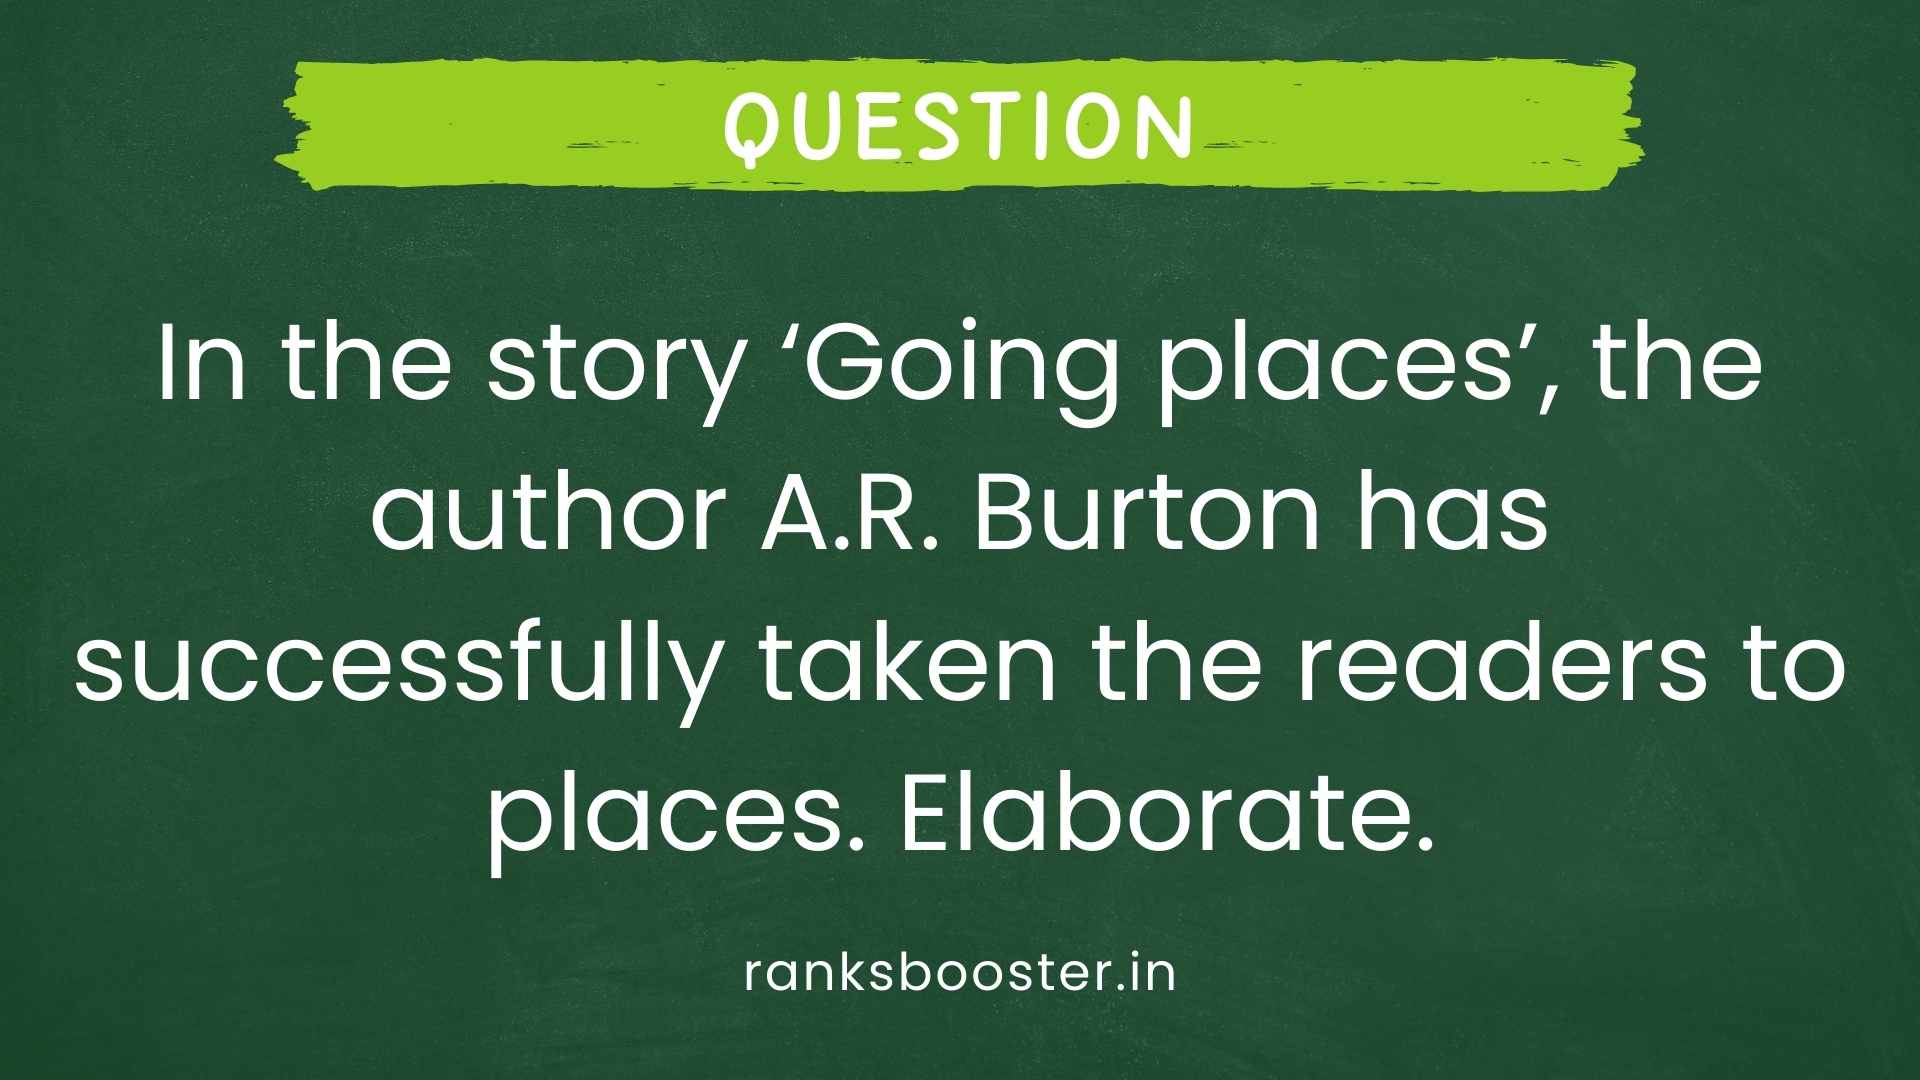 Question: In the story ‘Going places’, the author A.R. Burton has successfully taken the readers to places. Elaborate